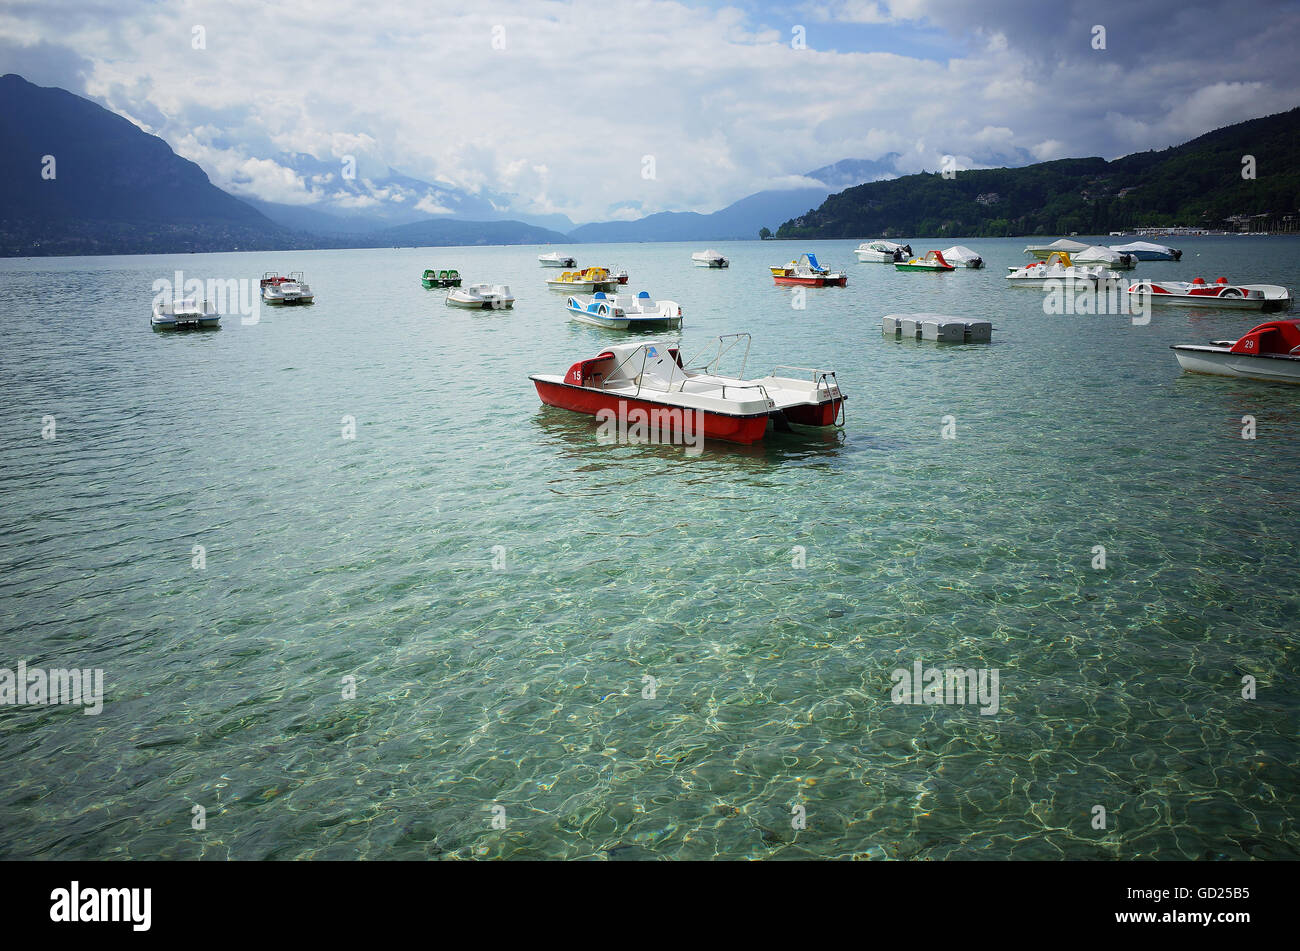 The Lake, Annecy, Rhone Alpes, France, Europe Stock Photo